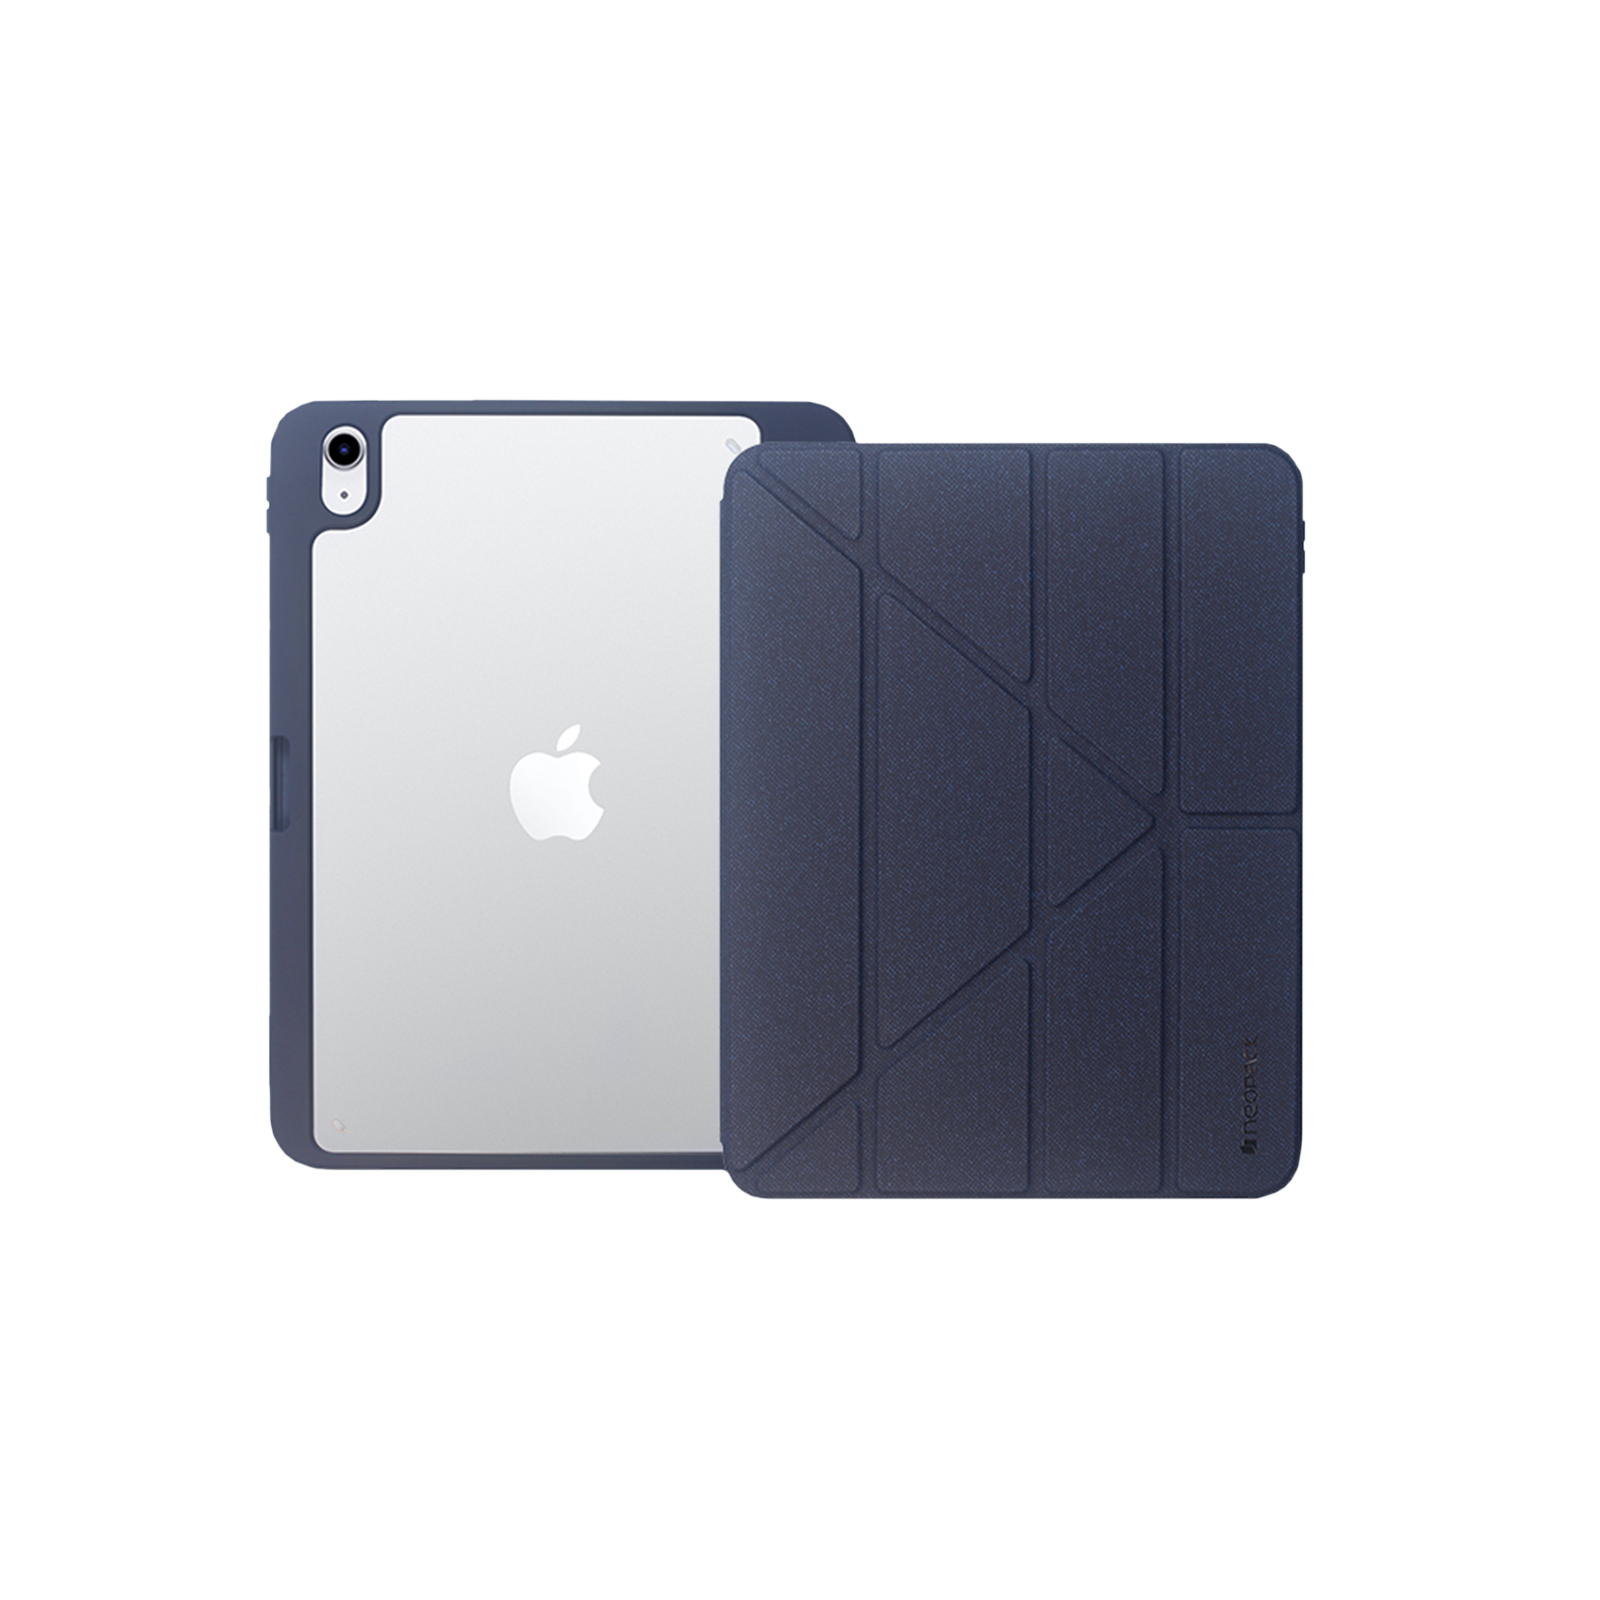 Neopack Alpha Back Case for Apple iPad Air 10.9 Inch 4th and 5th Gen (Pencil Holder, Navy Blue)